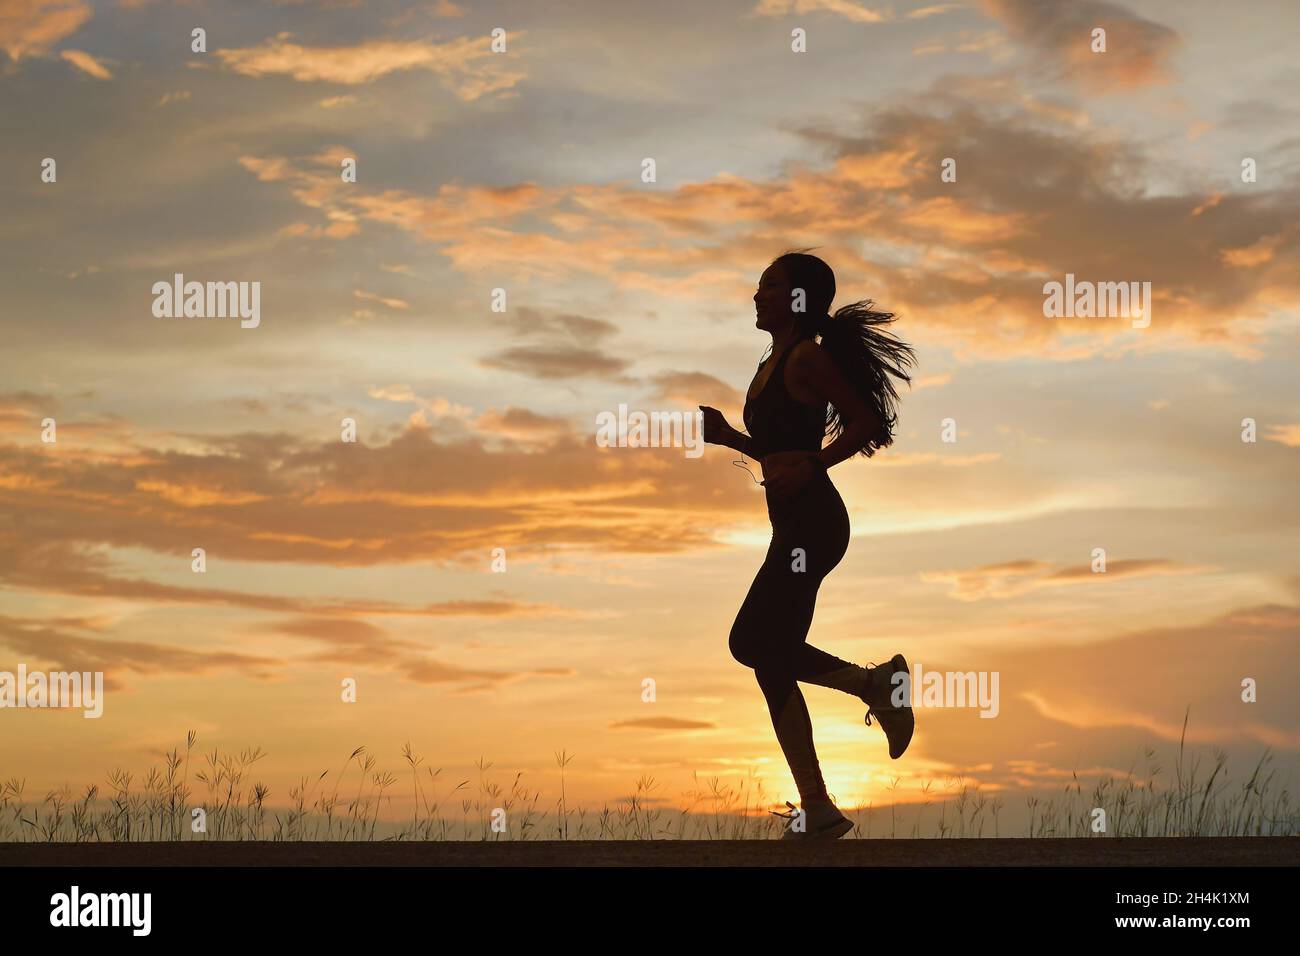 Silhouette of a woman jogging at sunset, Thailand Stock Photo